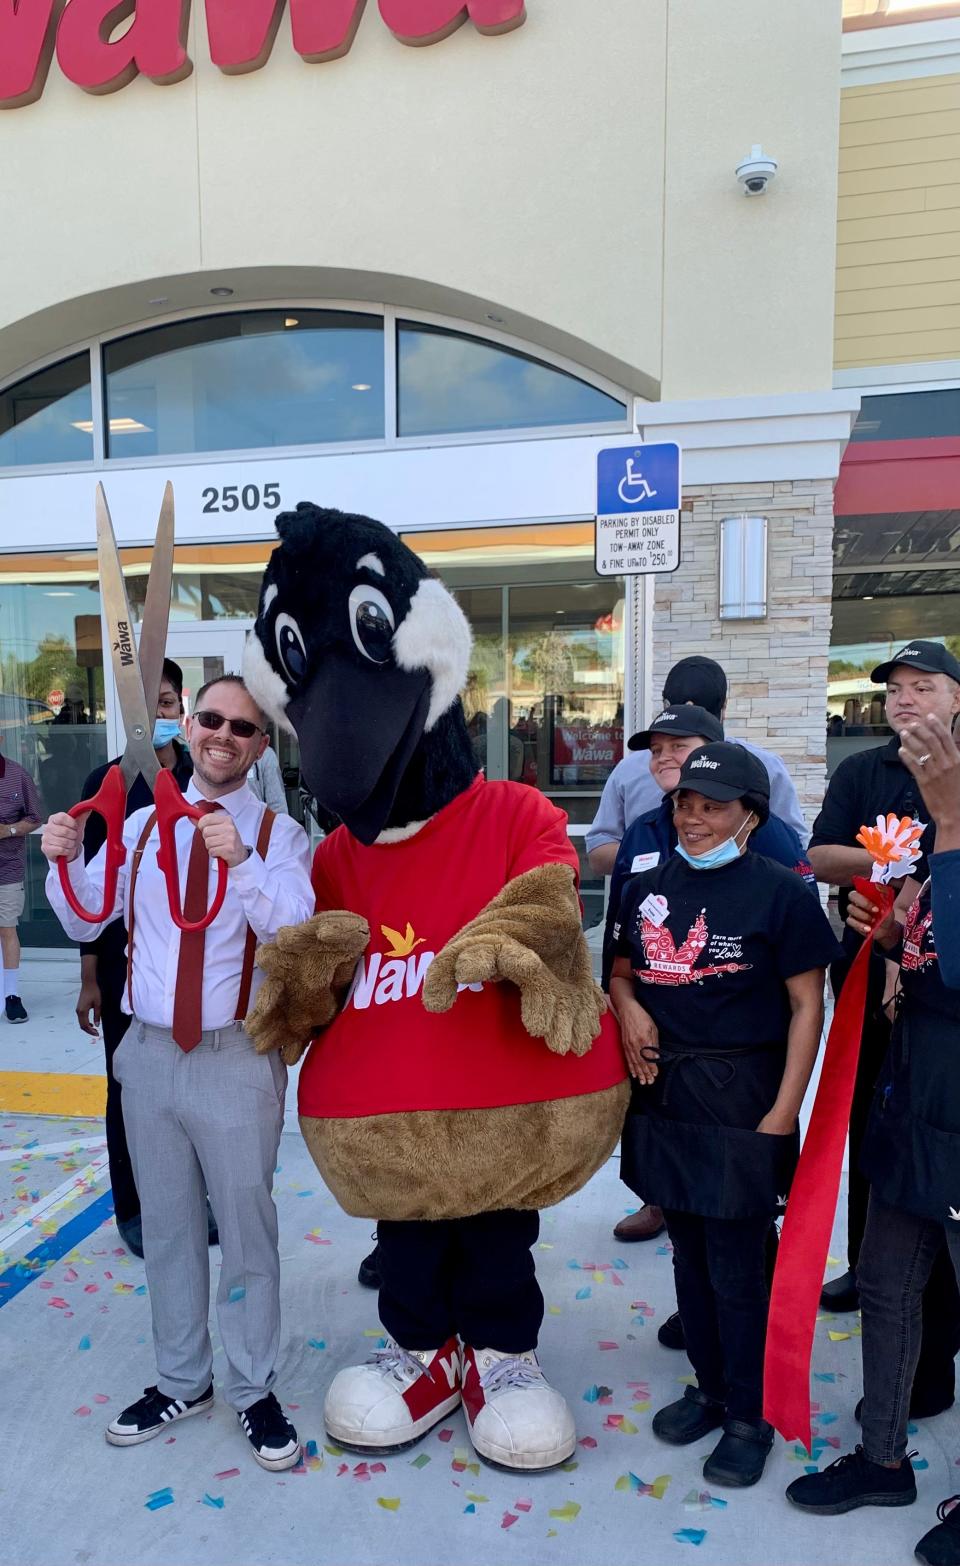 Wawa's mascot, Wally Goose, joins customers at a celebratory opening in this file photo